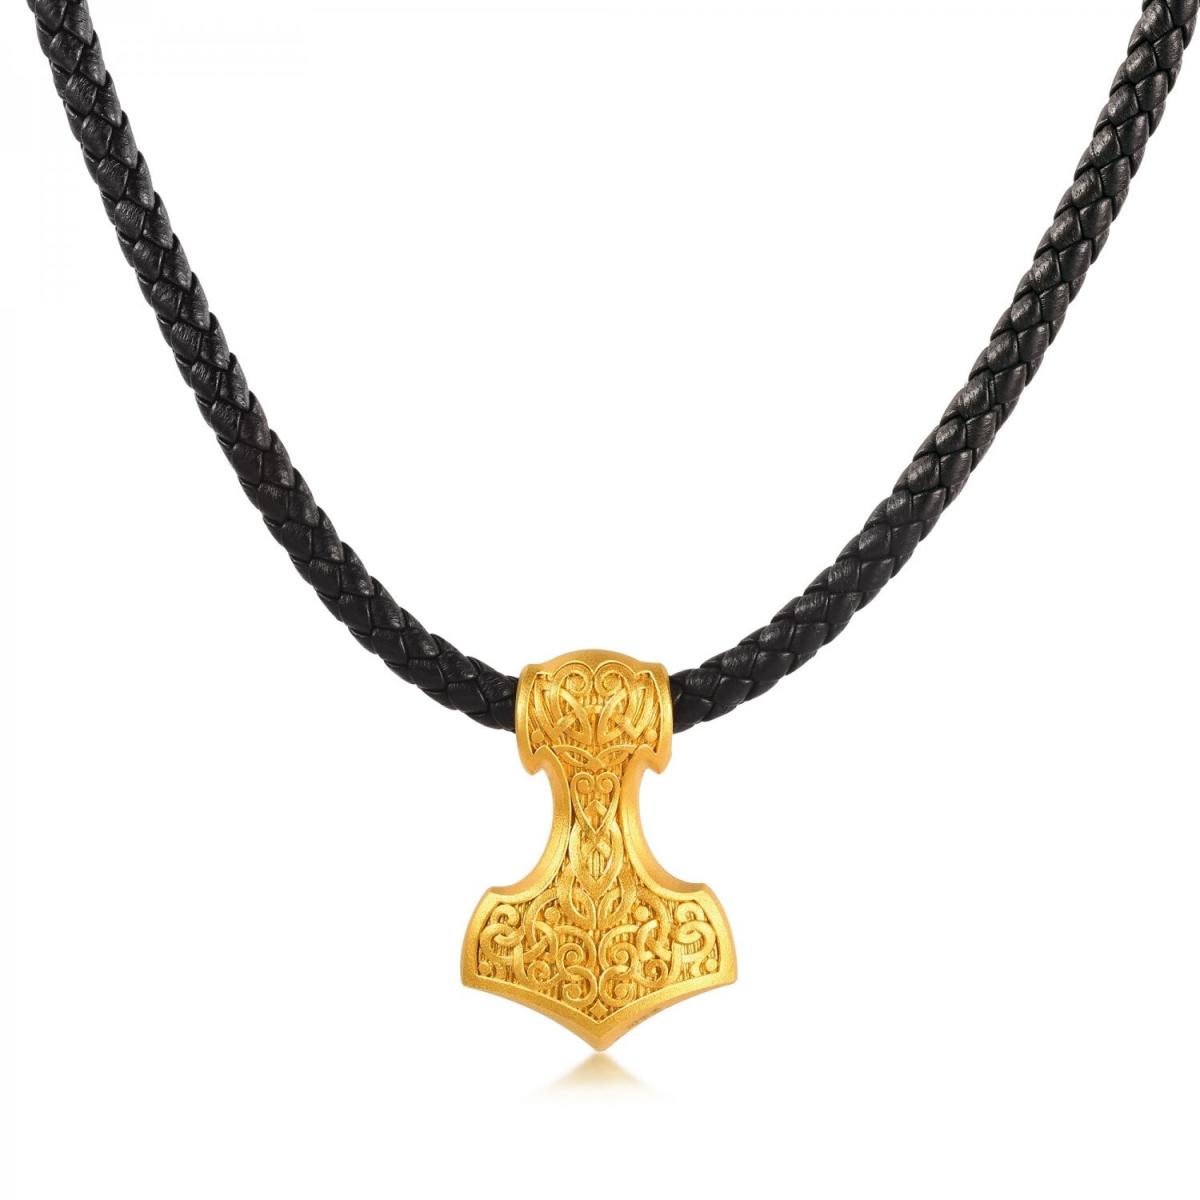 Cultural Blessing 'The Legend' 999.9 Gold Thor's Hammer Necklace Price-by-Weight approx 0.66 tael